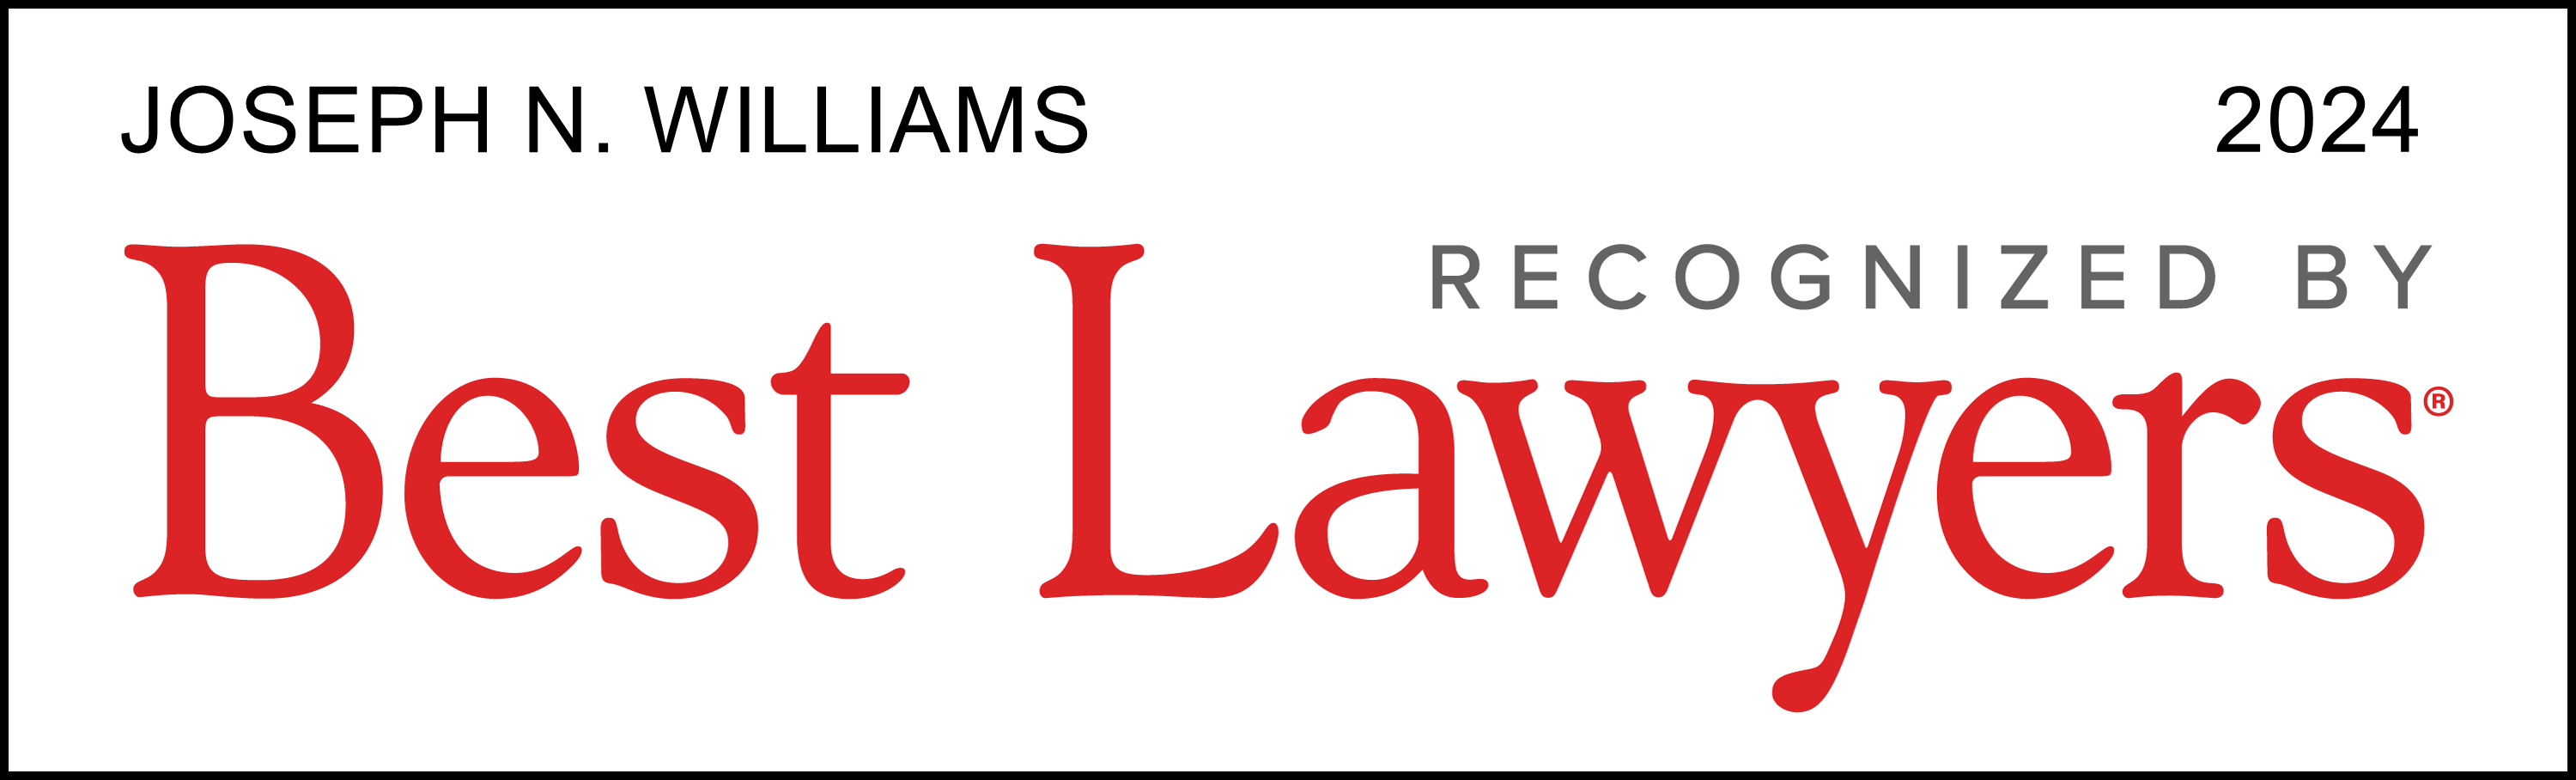 Joseph N. Williams Joven Recognized By Best Lawyers